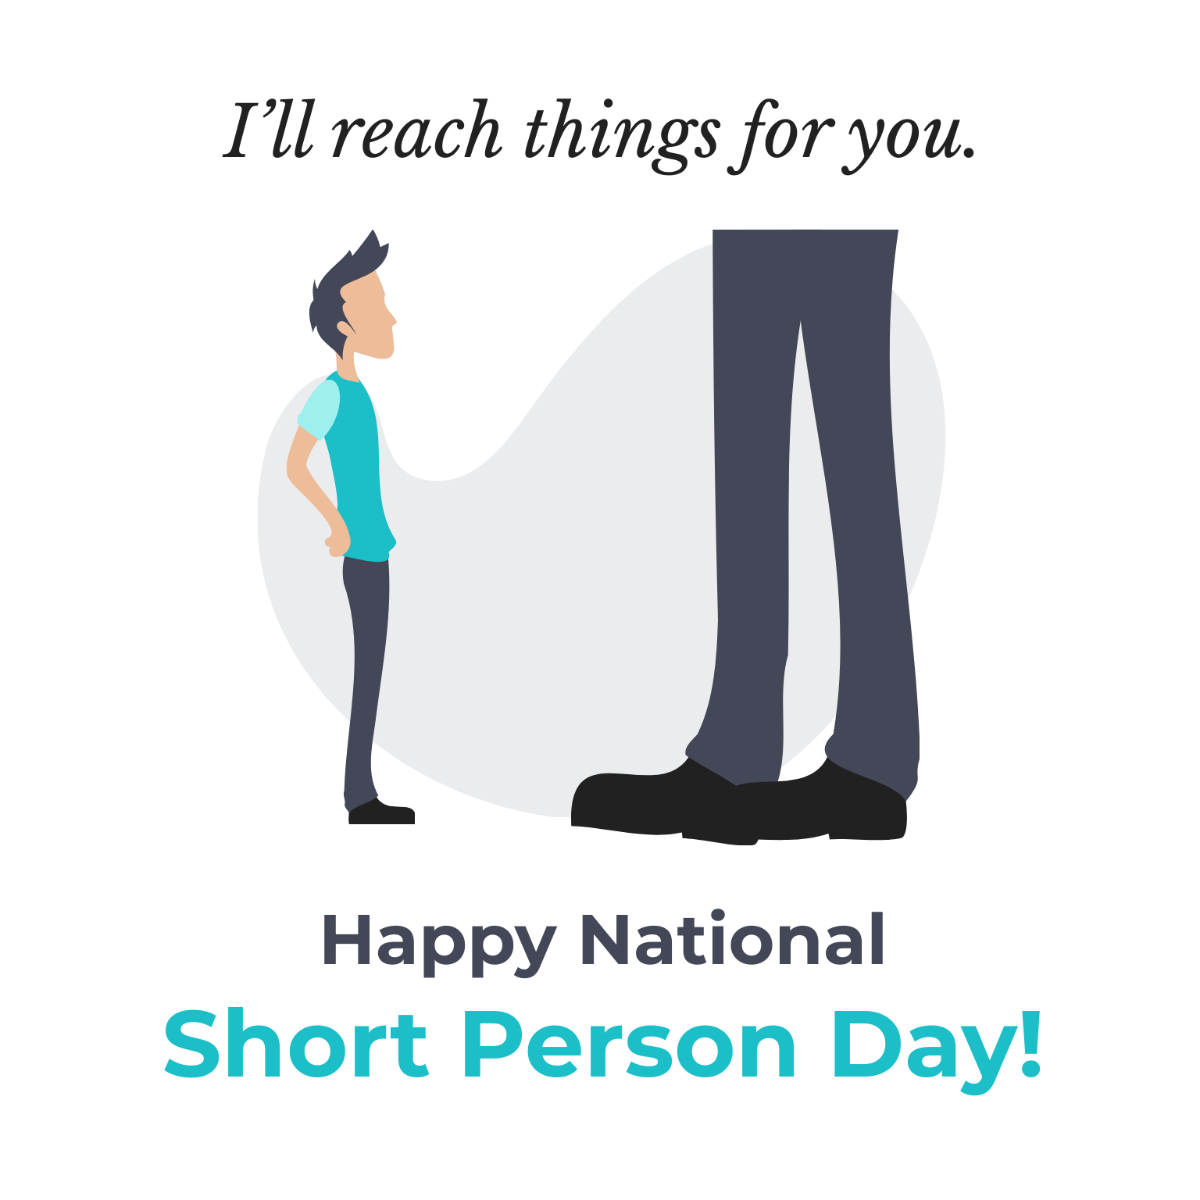 National Short Person Day Greeting Card Vector Template